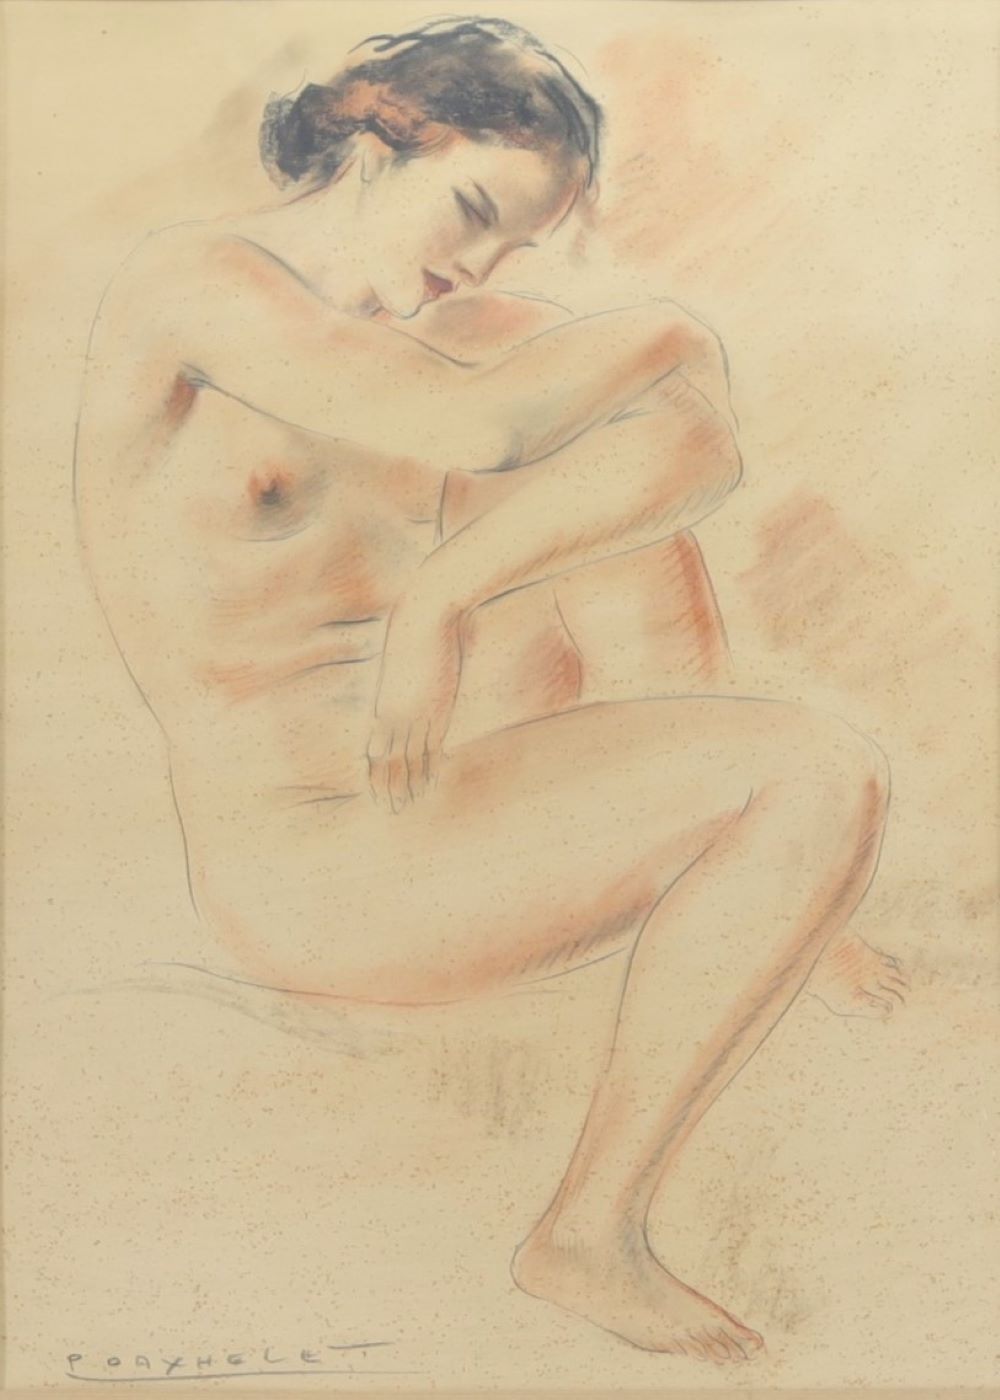 Paul DAXHELET (1905-1993) "Young woman naked" Pencil and charcoal drawing.